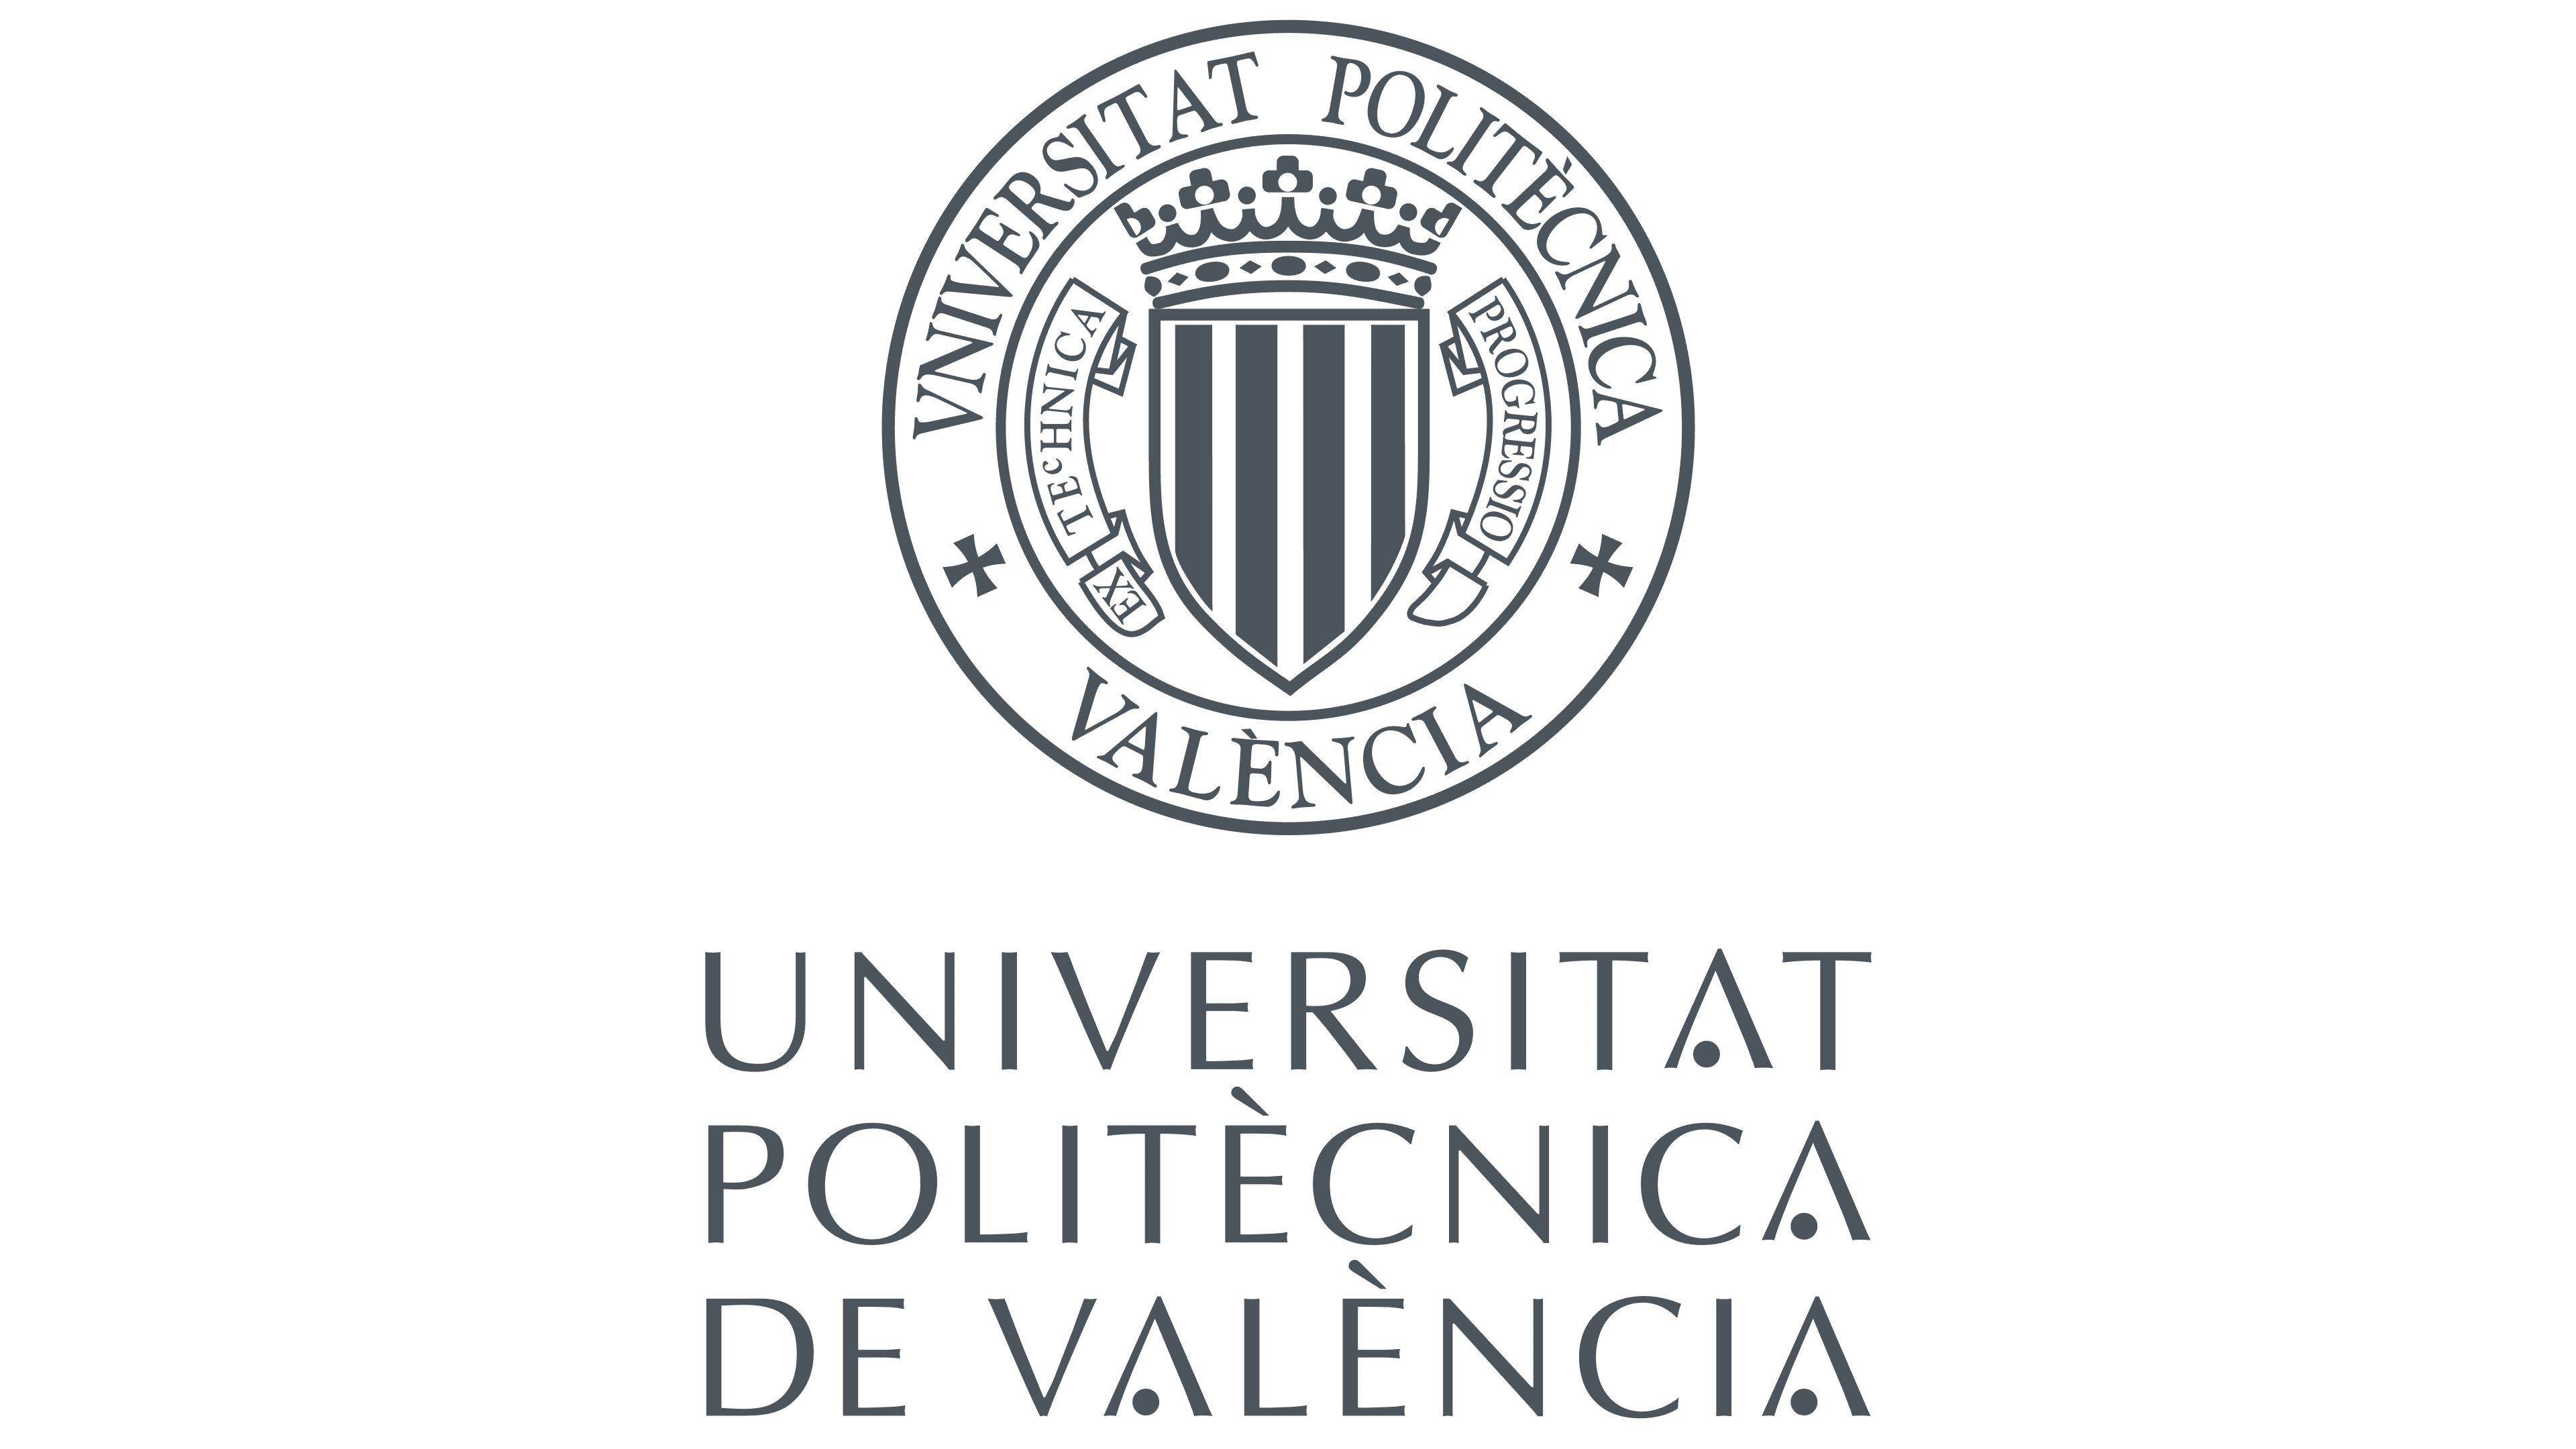 The logo is a ring with the words "Universitat Politecnica de Valencia". Within that there is a badge with stripes on it.